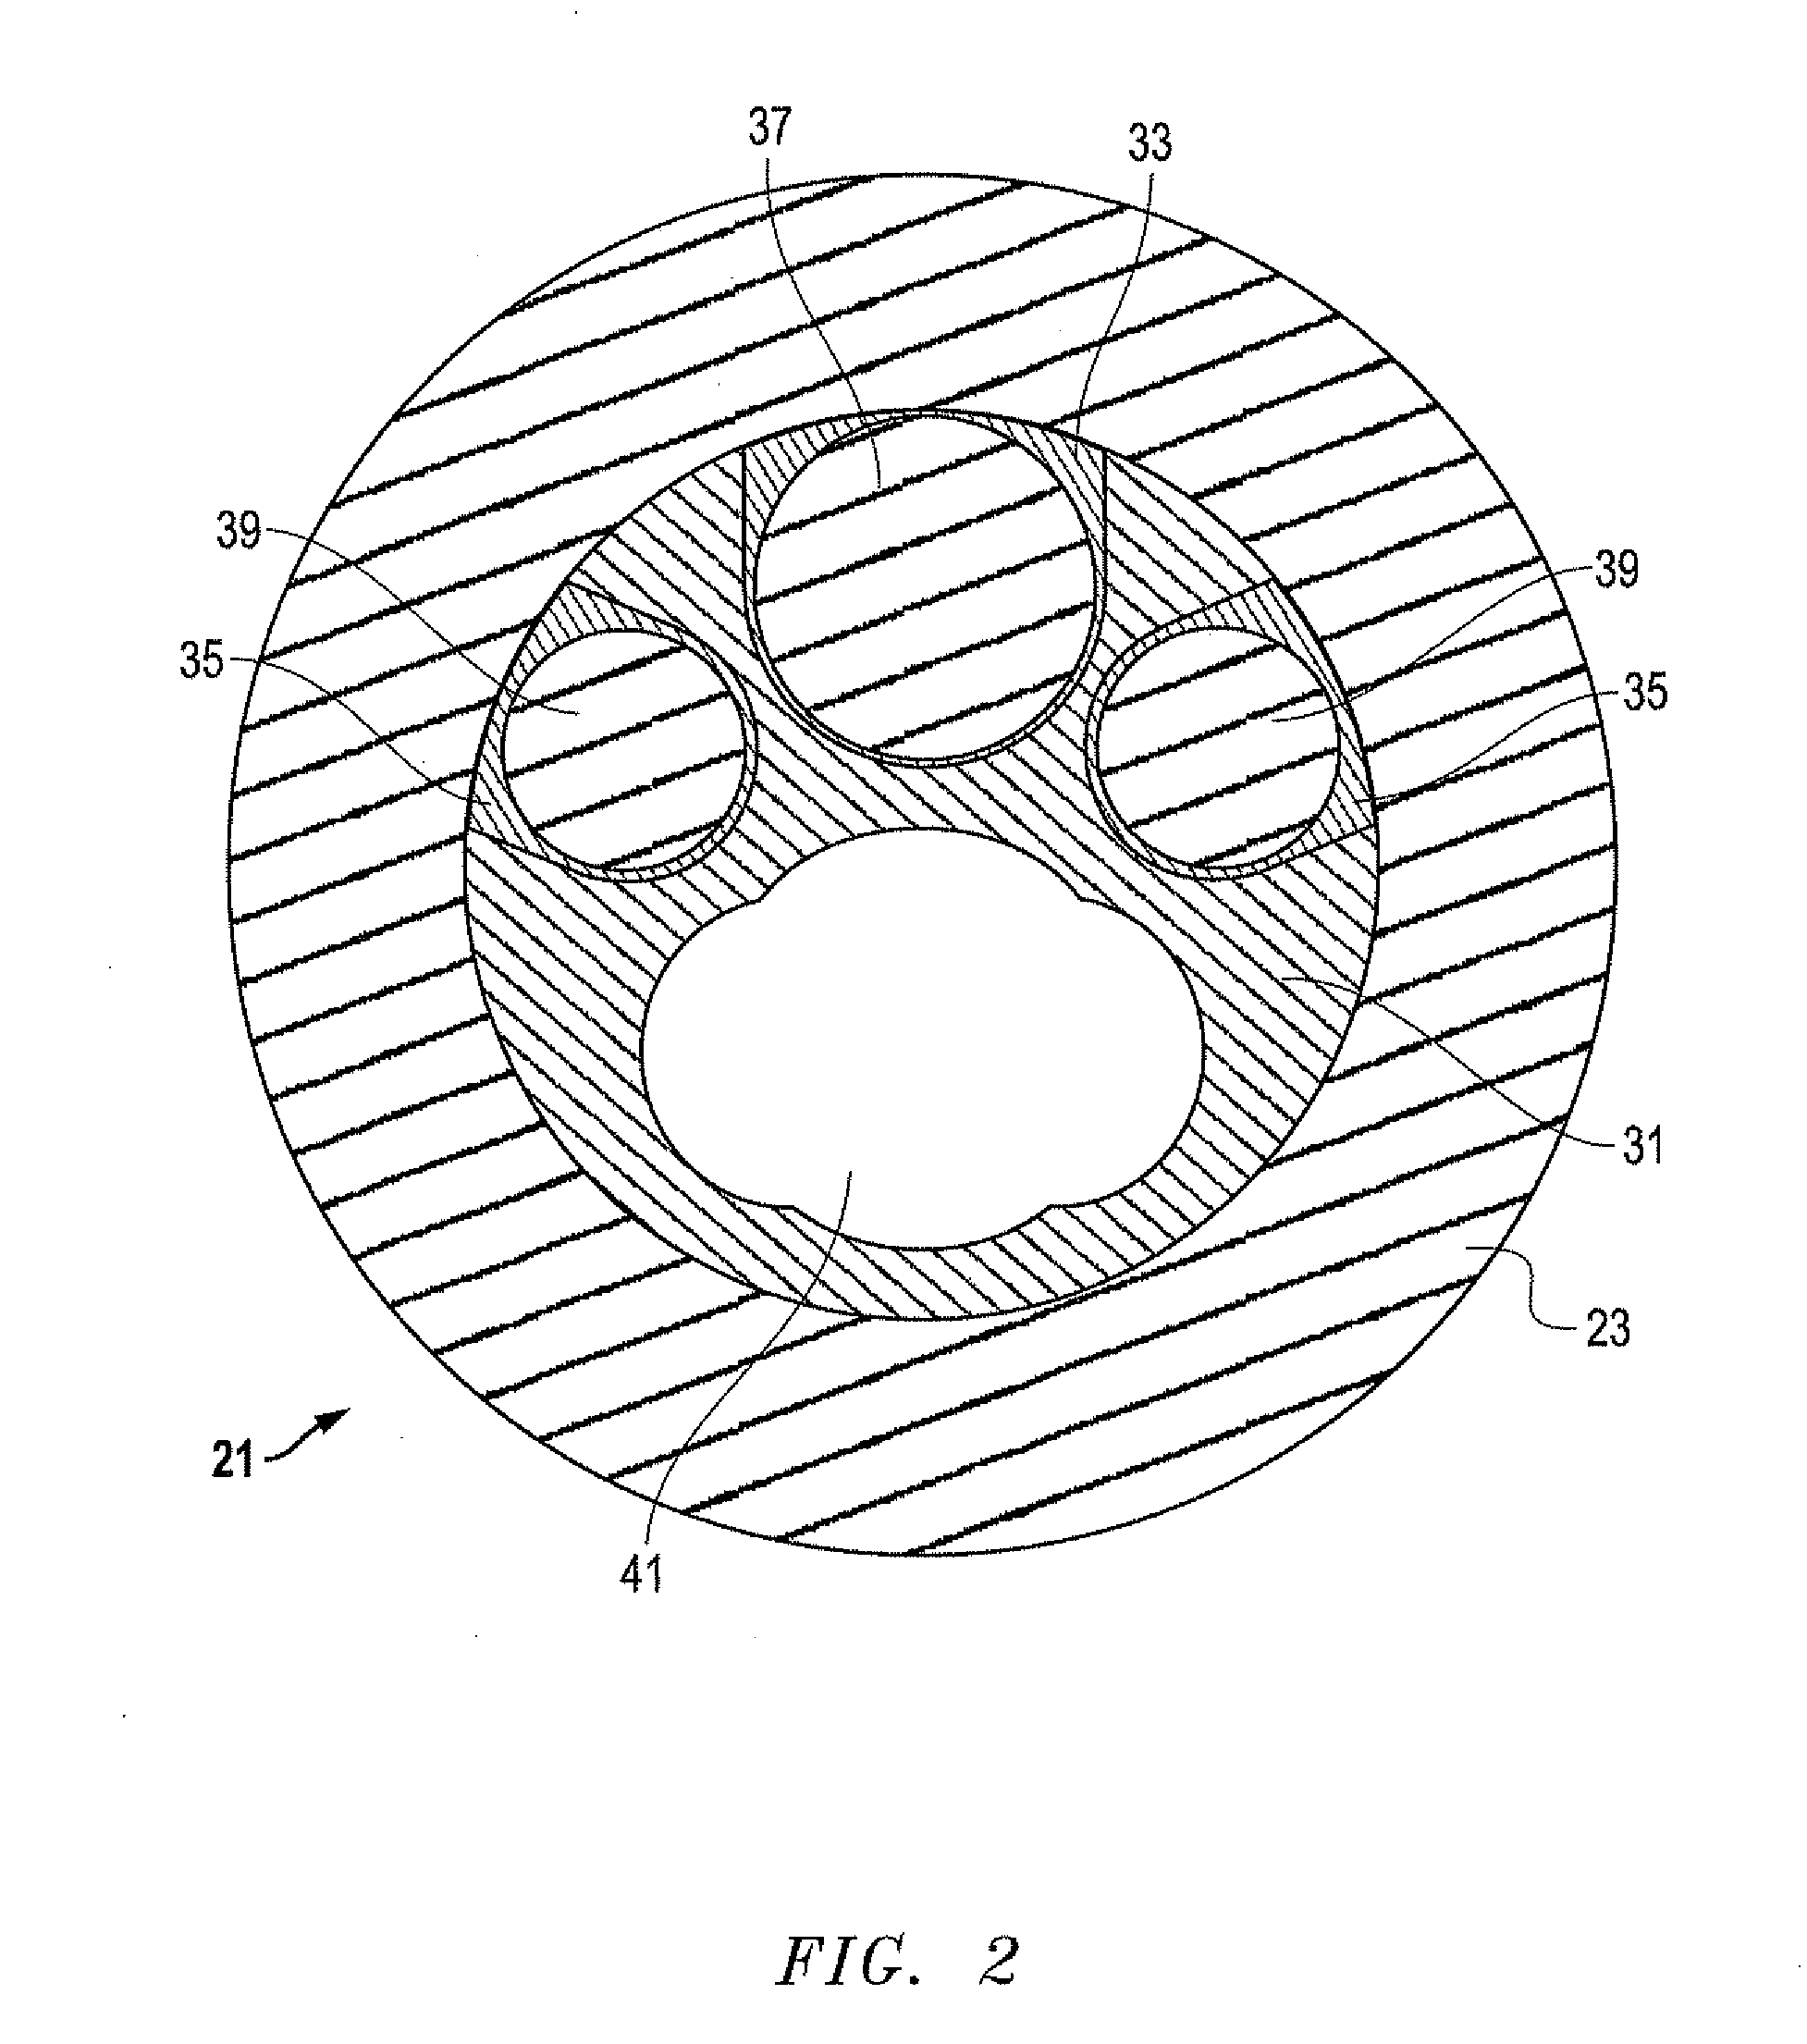 System, method and apparatus for downhole system having integrated measurement while operating components